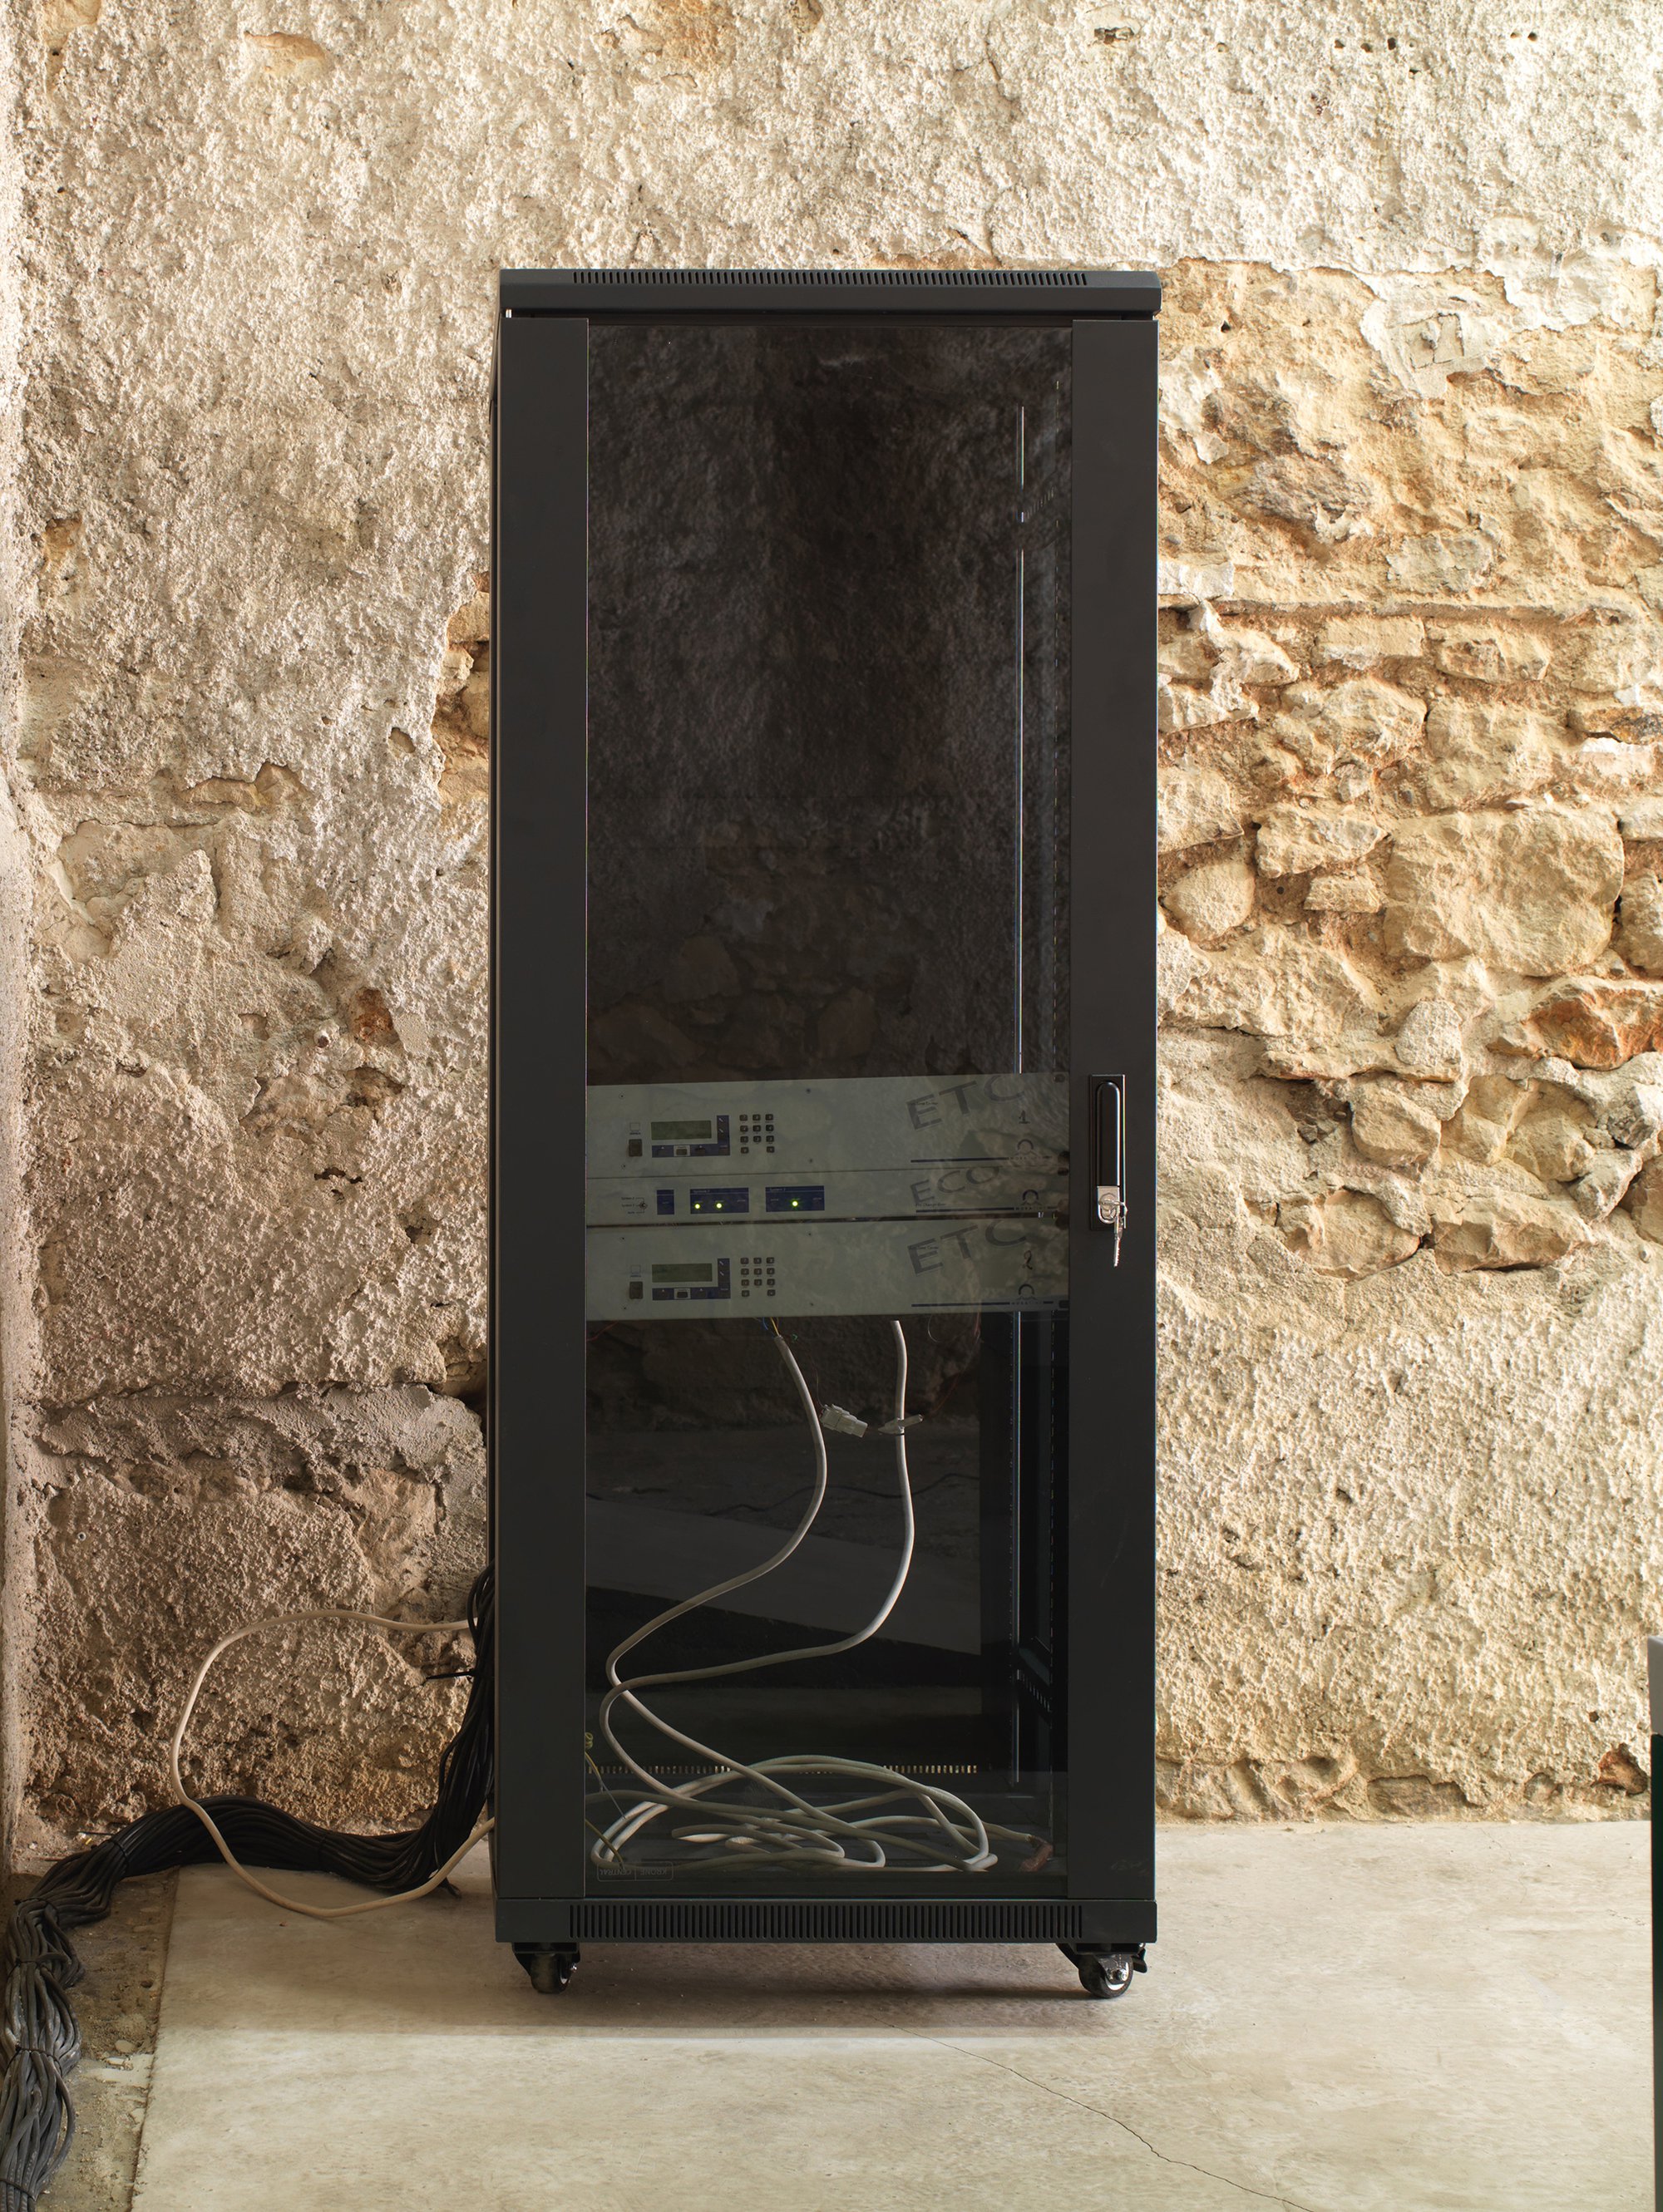 Iris Touliatou, mother frame, empty server cabinet, cables, 60 x 60 x 160 cm &amp; 665 meters approx. (23 5/8 x 23 5/8 x 63 in &amp; 261 3/4 in approx.), 2022